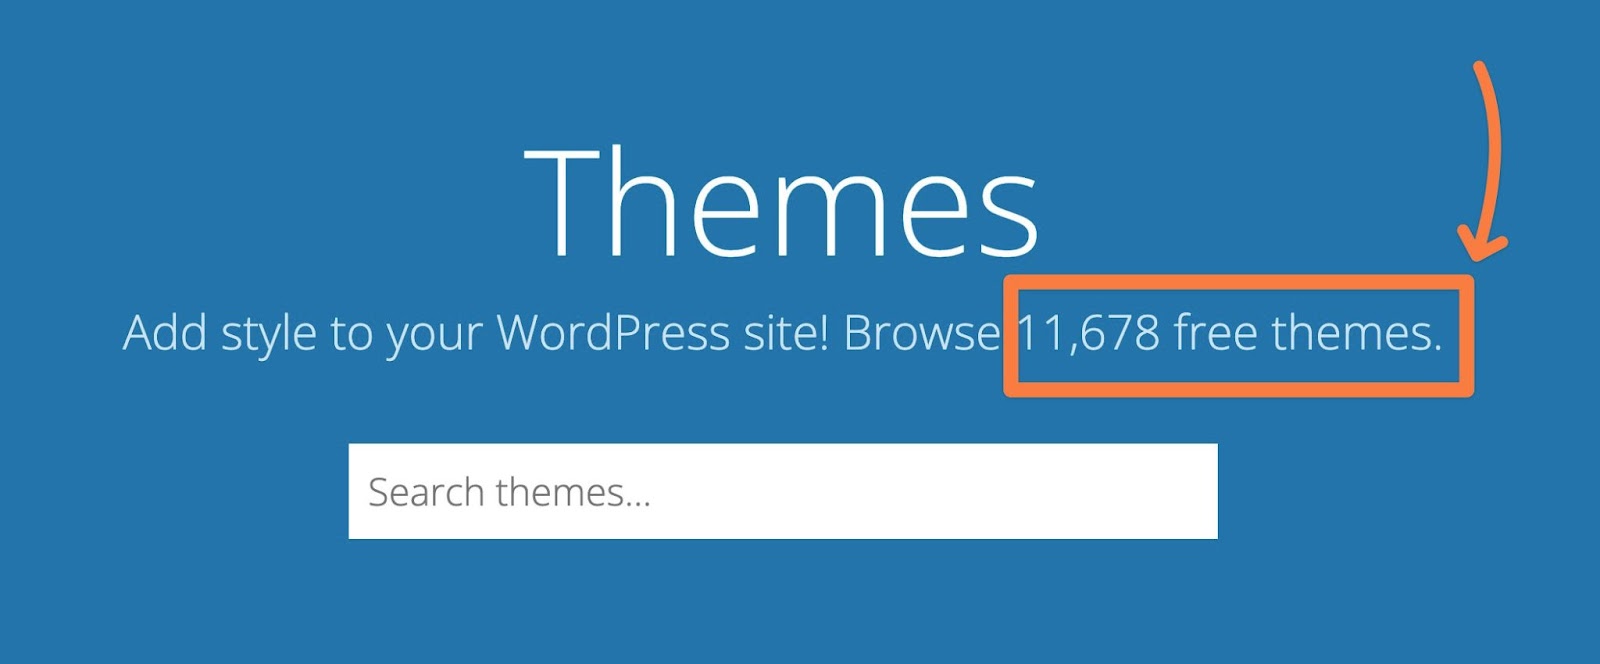 Unbounce vs WordPress, The WordPress.org theme directory has over 11,000 free themes